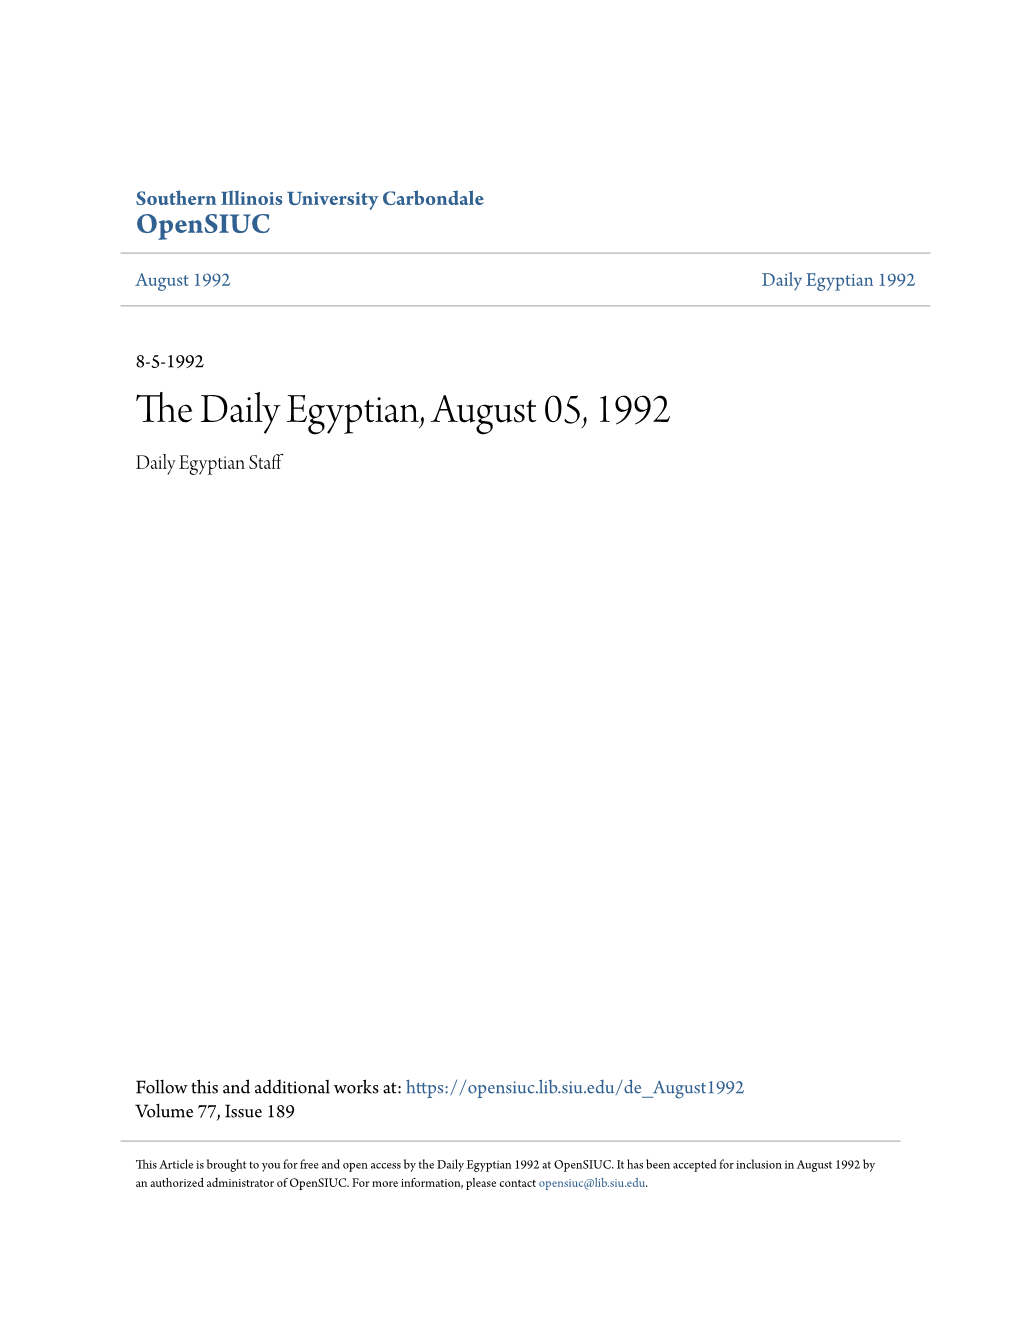 The Daily Egyptian, August 05, 1992